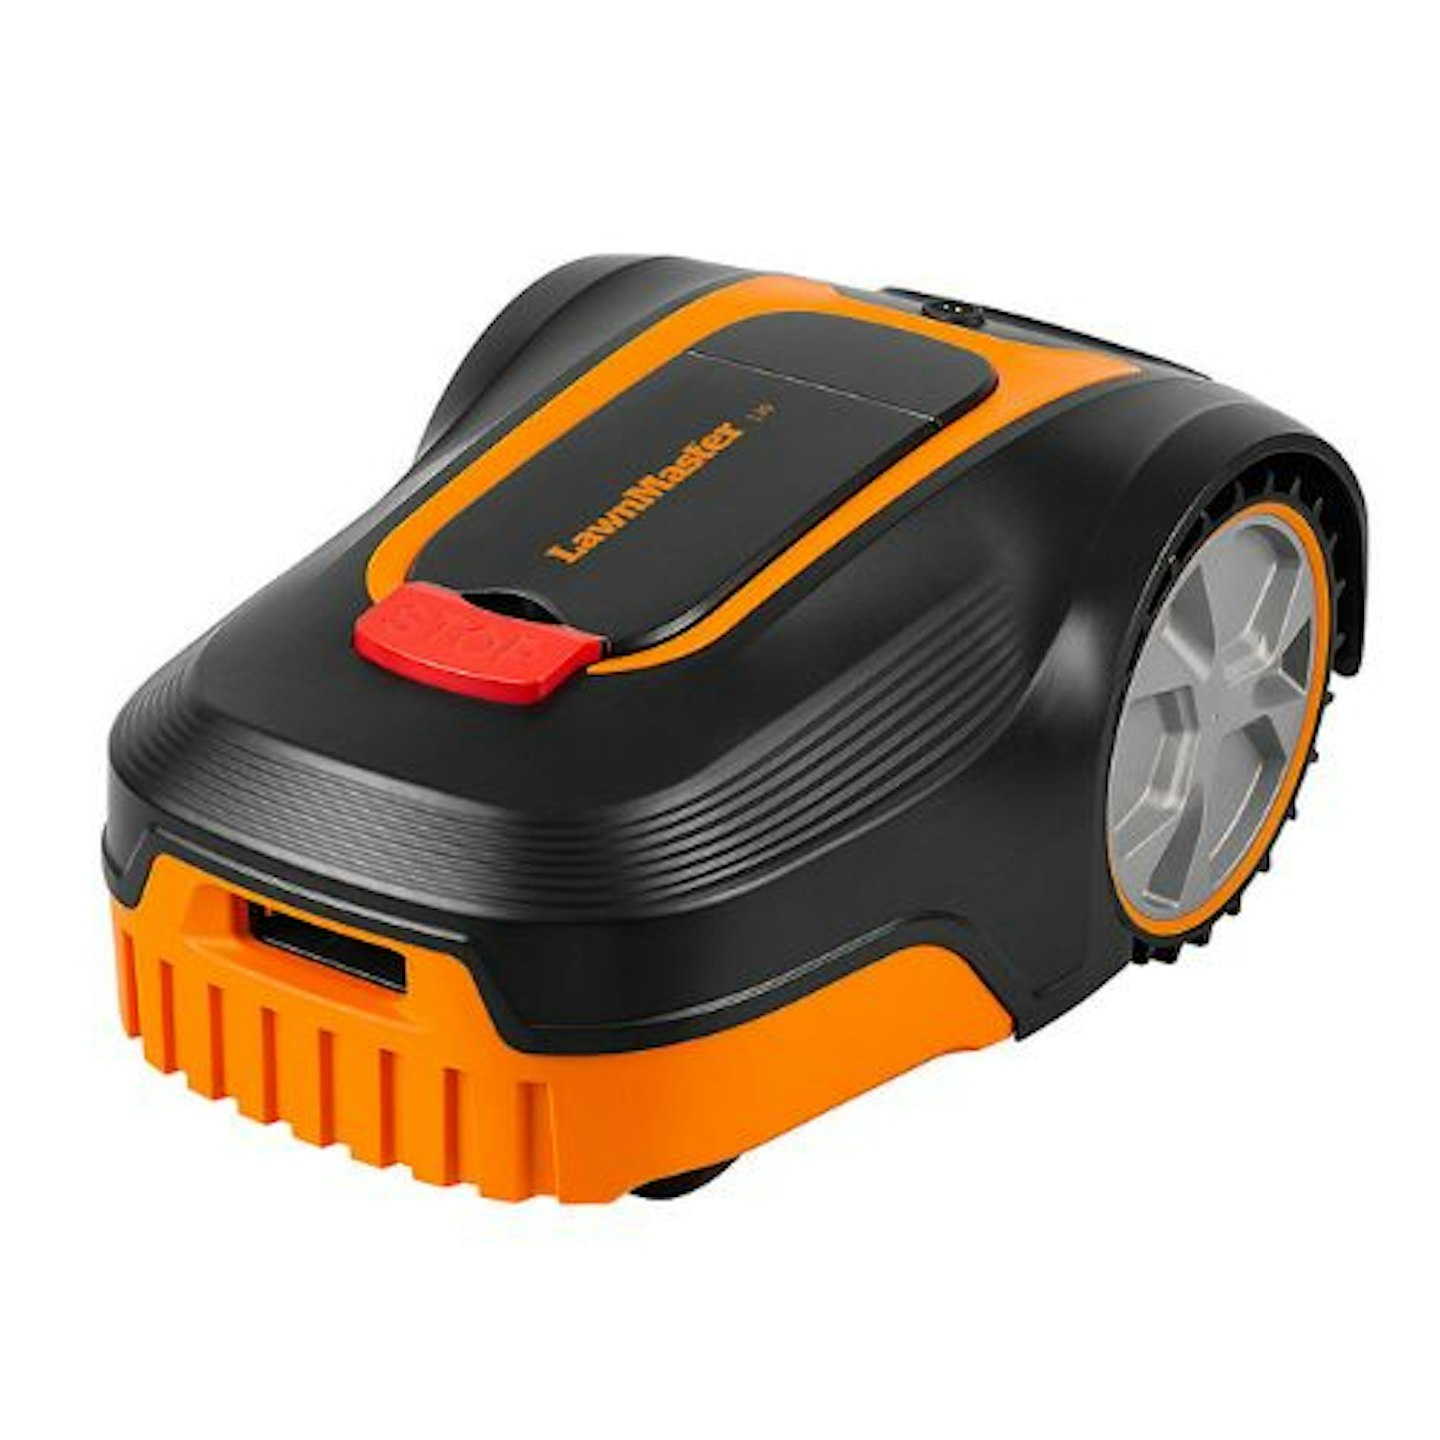 LawnMaster L12 Robotic Lawnmower - Fully Automatic Robot Mower